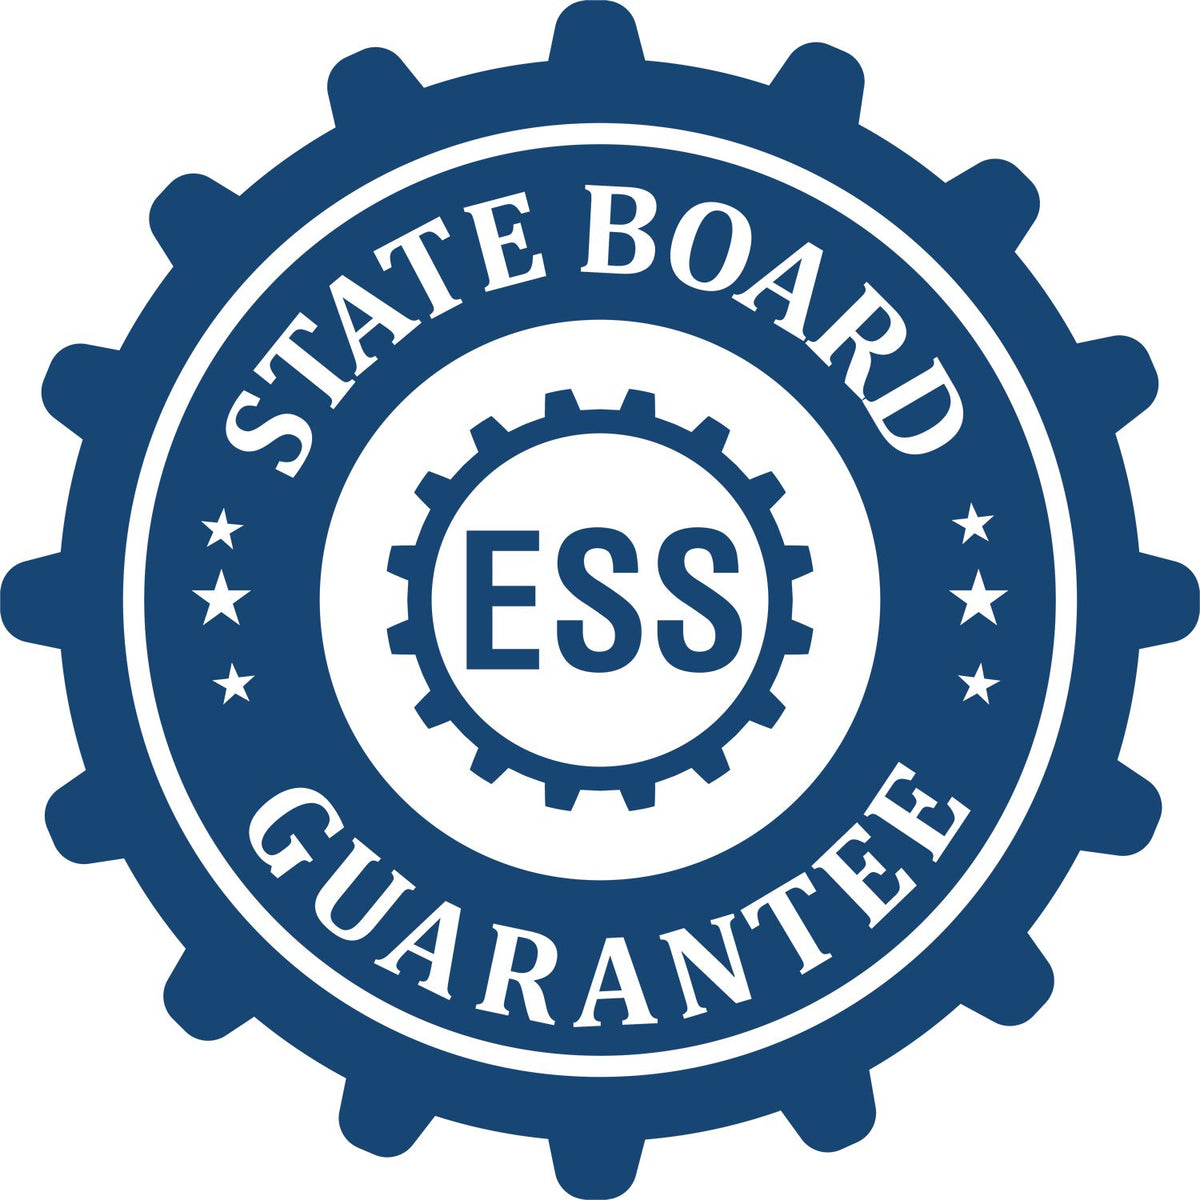 An emblem in a gear shape illustrating a state board guarantee for the Premium MaxLight Pre-Inked Pennsylvania Engineering Stamp product.